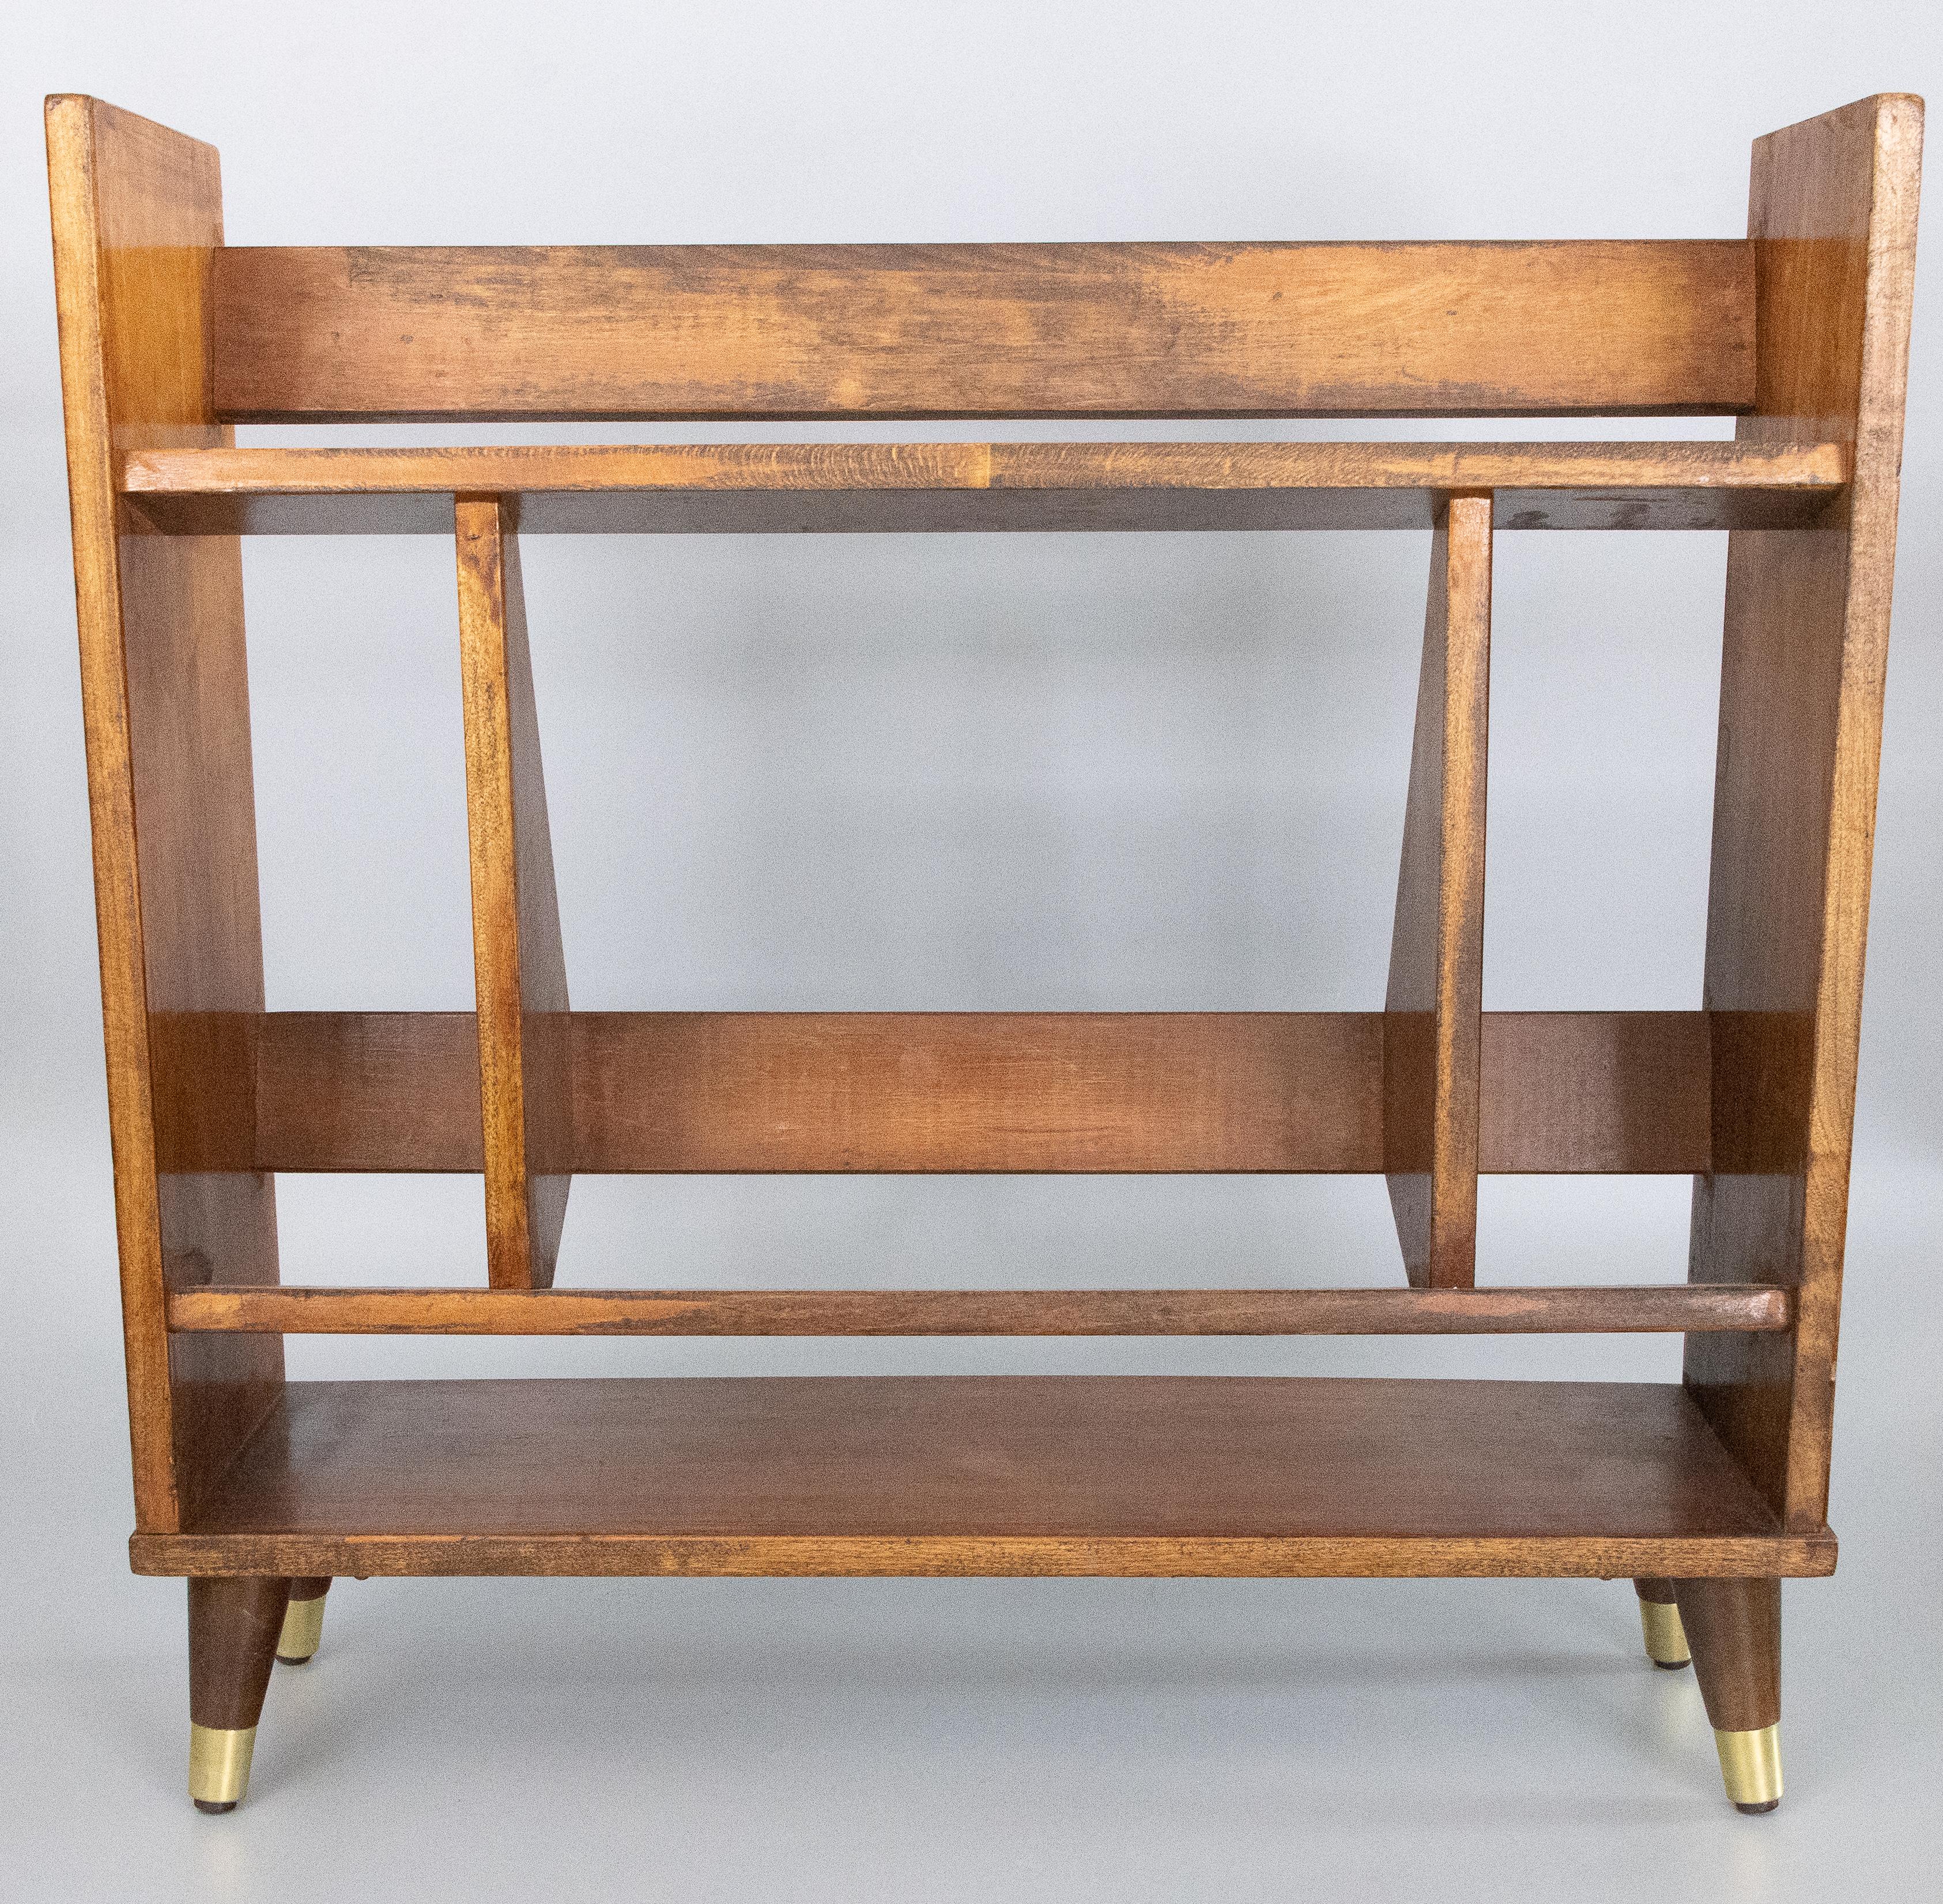 A stylish Mid-Century Modern walnut bookcase /étagère / book shelves. This fine bookcase is well made and heavy with brass feet and a sleek and stylish design, perfect for the modern home. Books not included.

DIMENSIONS
27